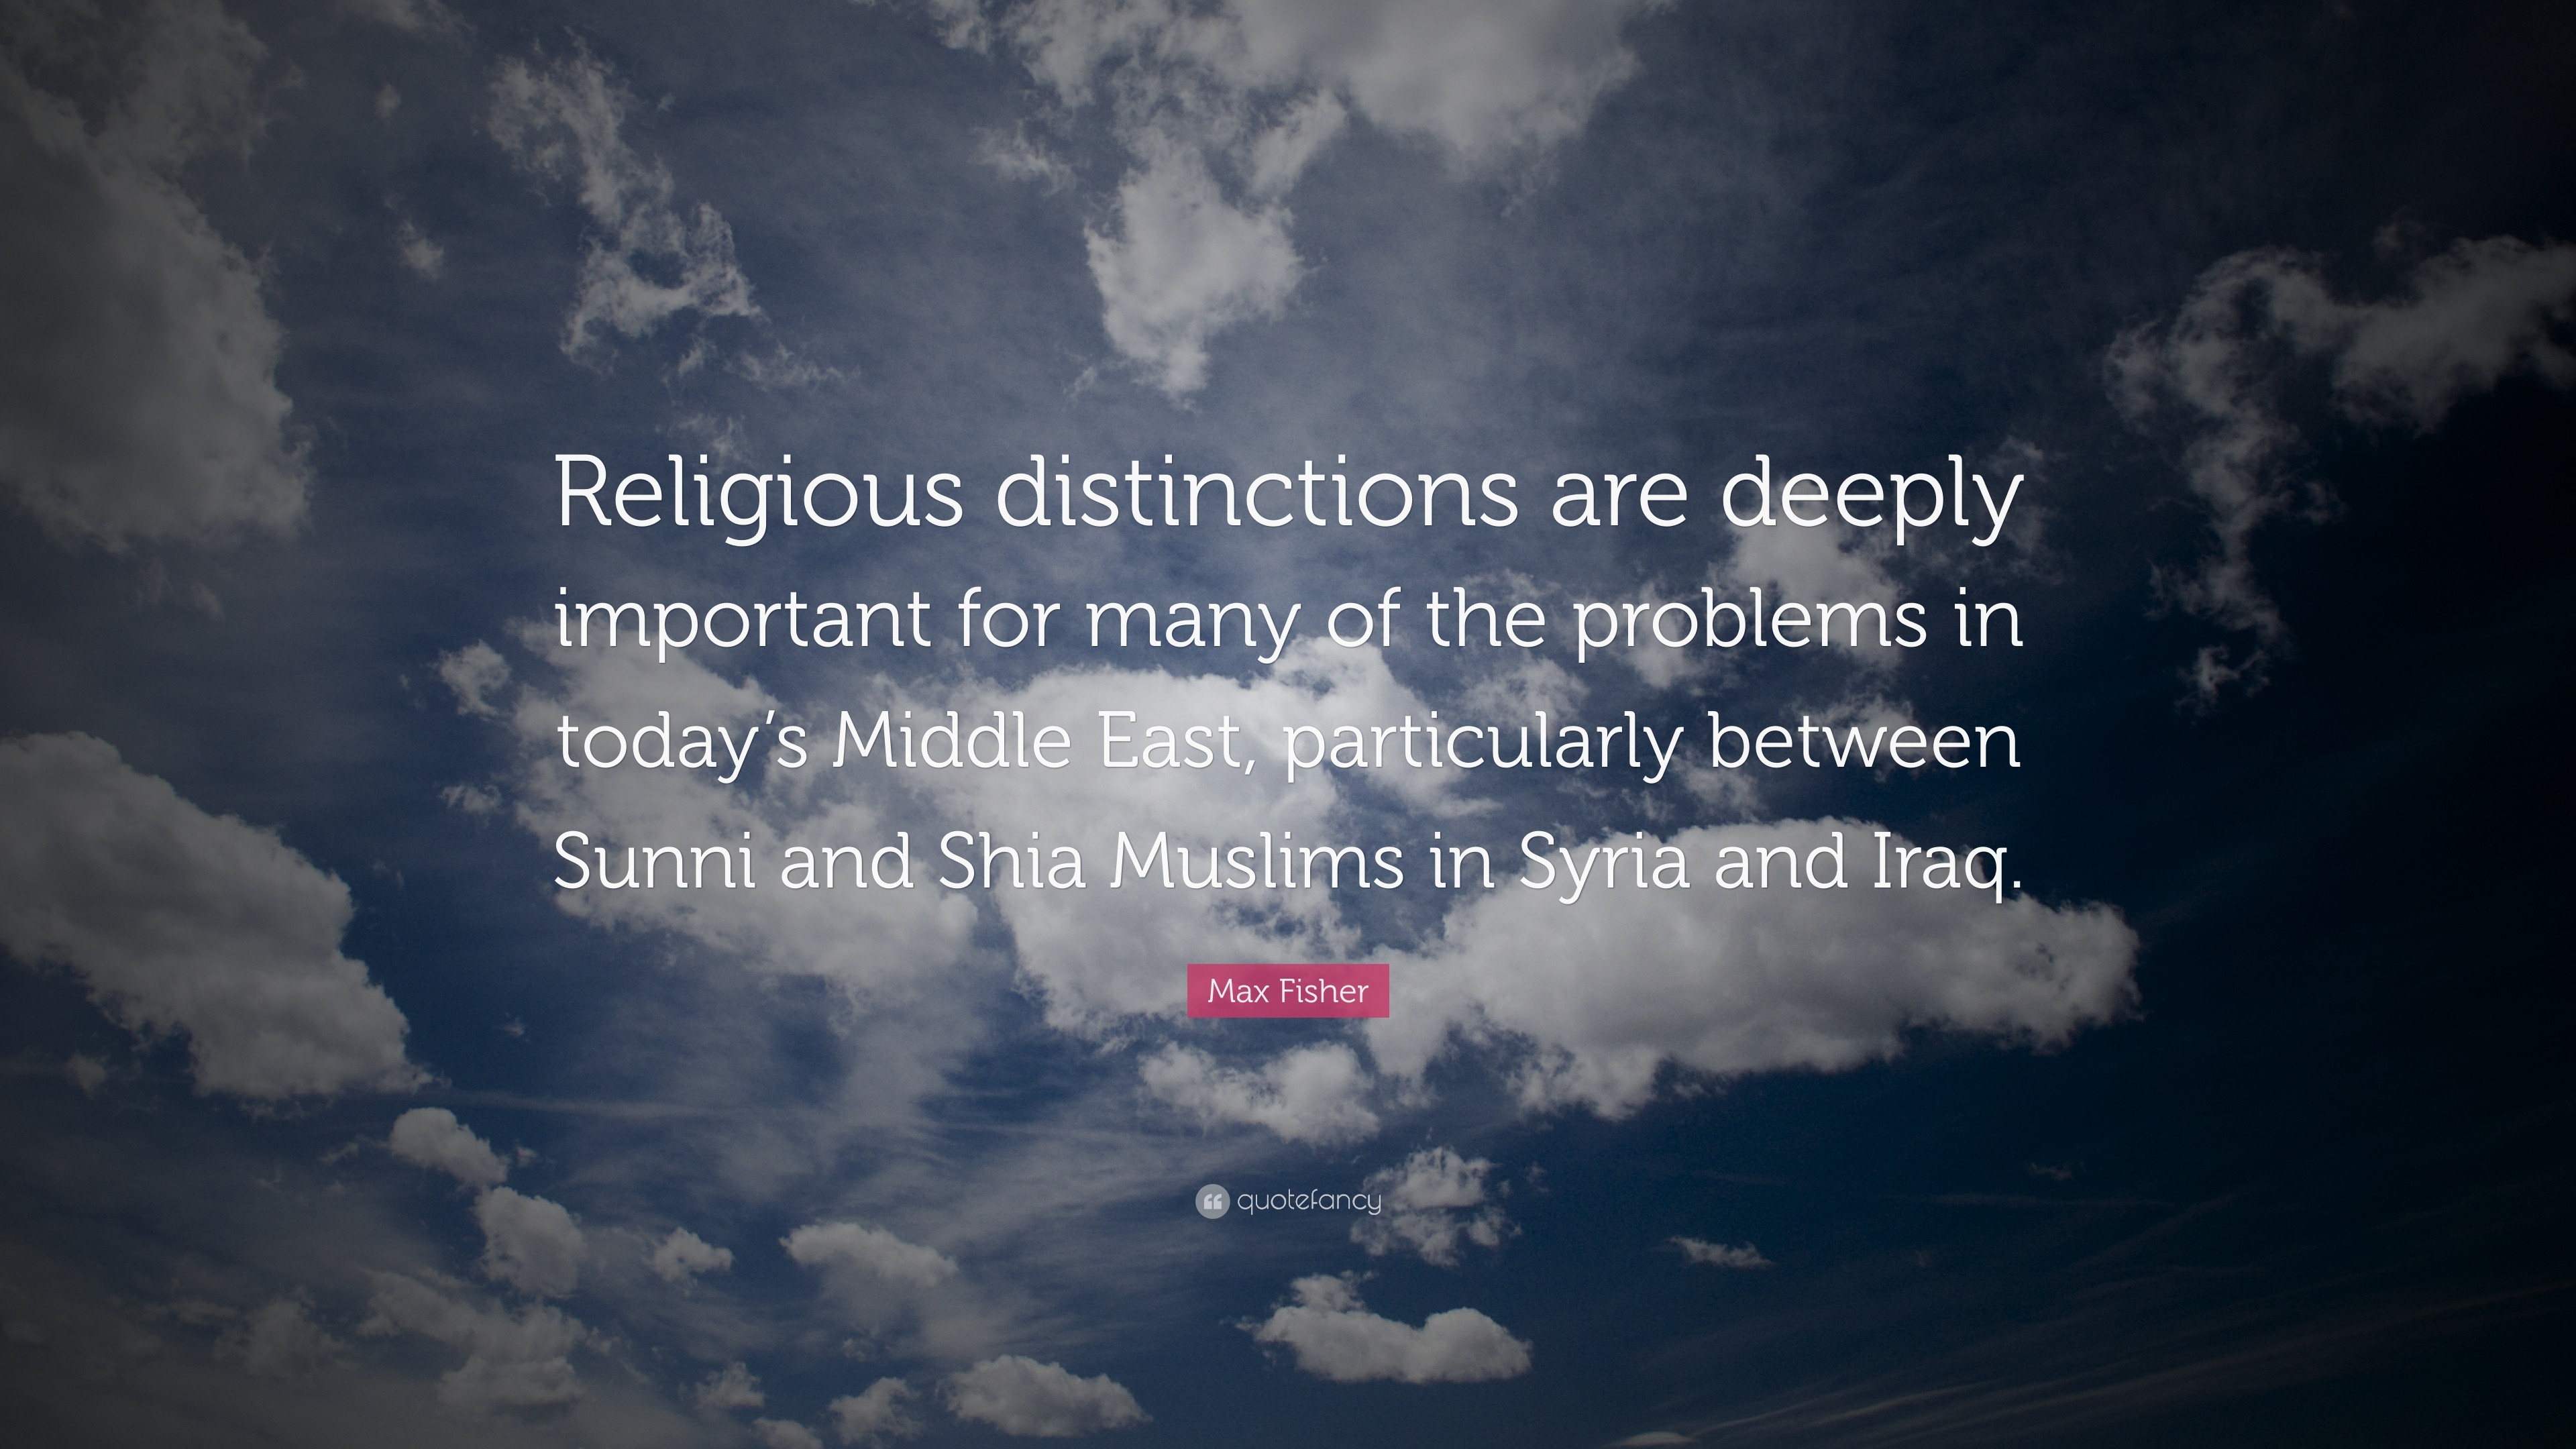 3840x2160 Max Fisher Quote: “Religious distinctions are deeply important for many of  the problems in